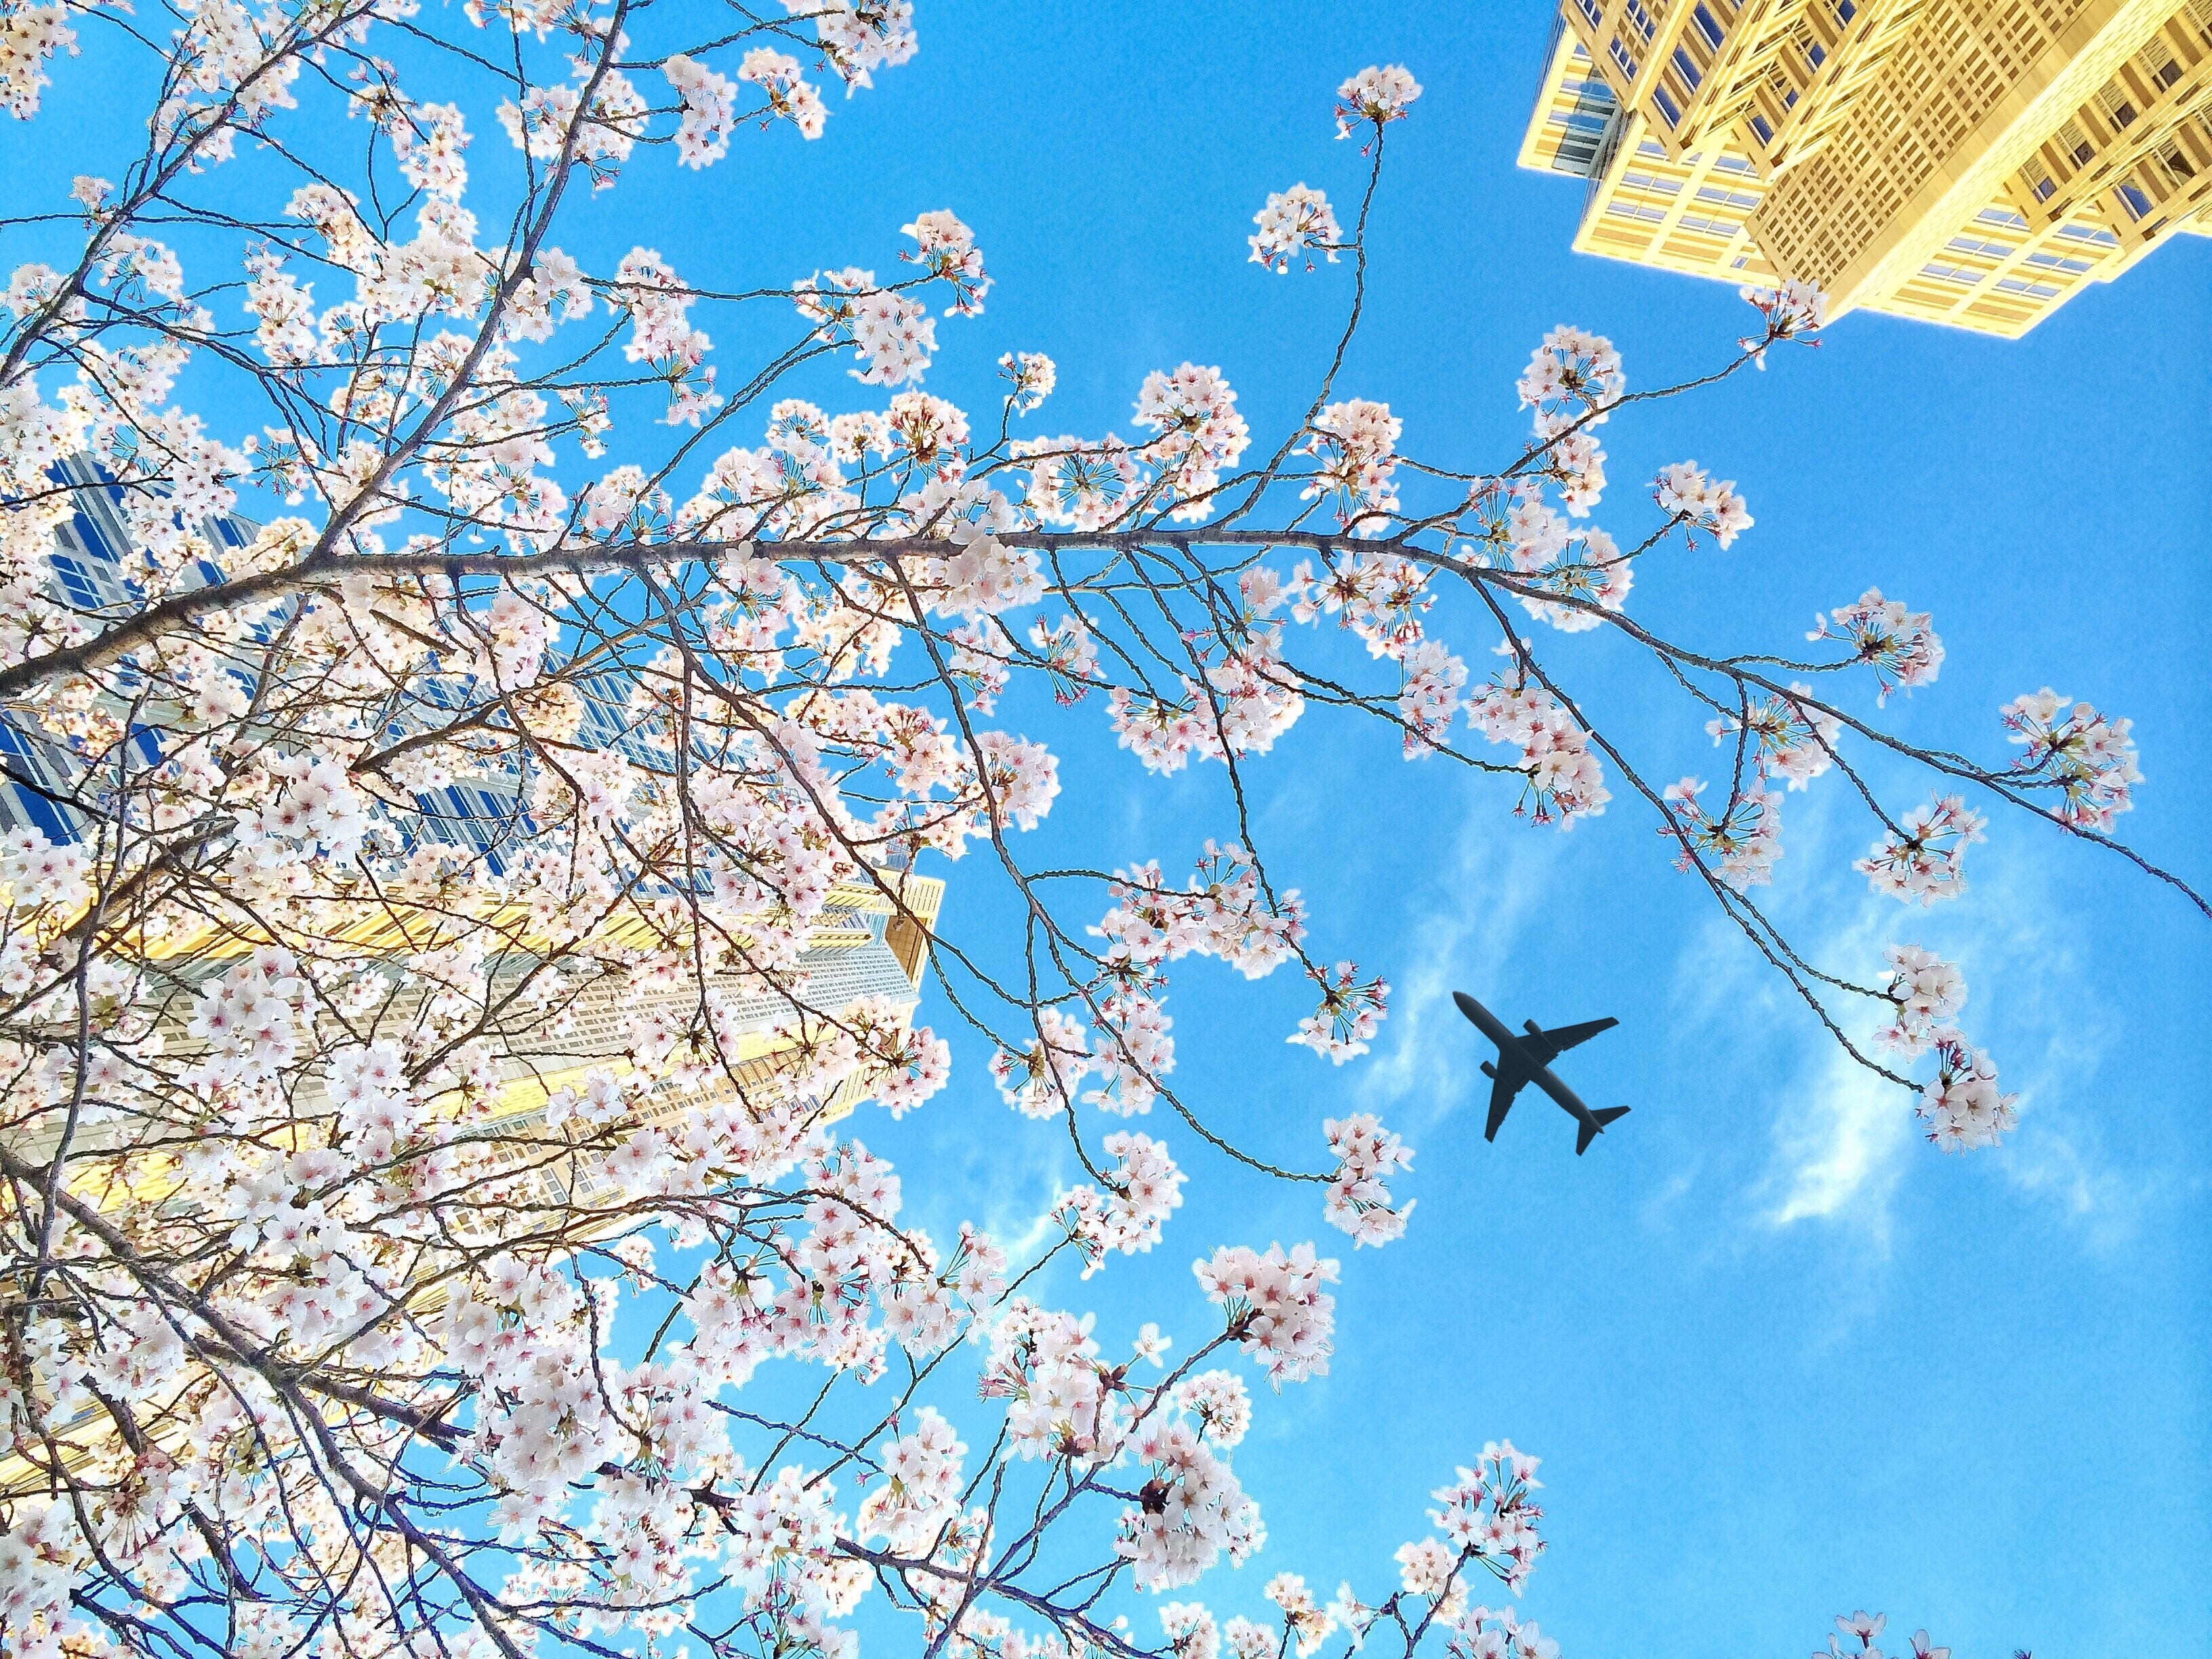 Low Angle View Of Cherry Blossoms Against Blue Sky